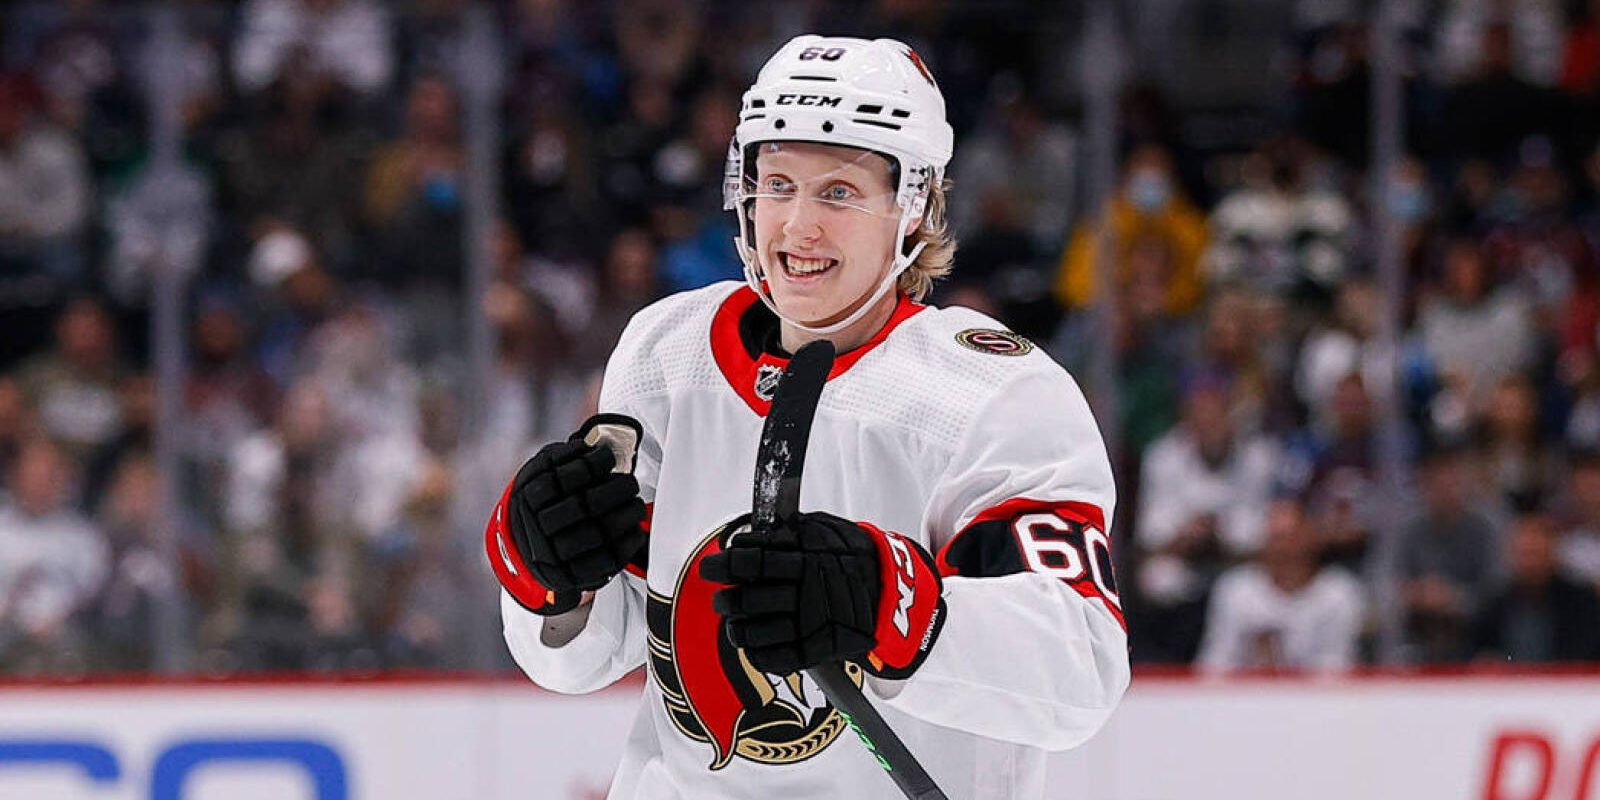 Nov 22, 2021; Denver, Colorado, USA; Ottawa Senators defenseman Lassi Thomson (60) celebrates after his goal in the first period against the Colorado Avalanche at Ball Arena. Mandatory Credit: Isaiah J. Downing-USA TODAY Sports